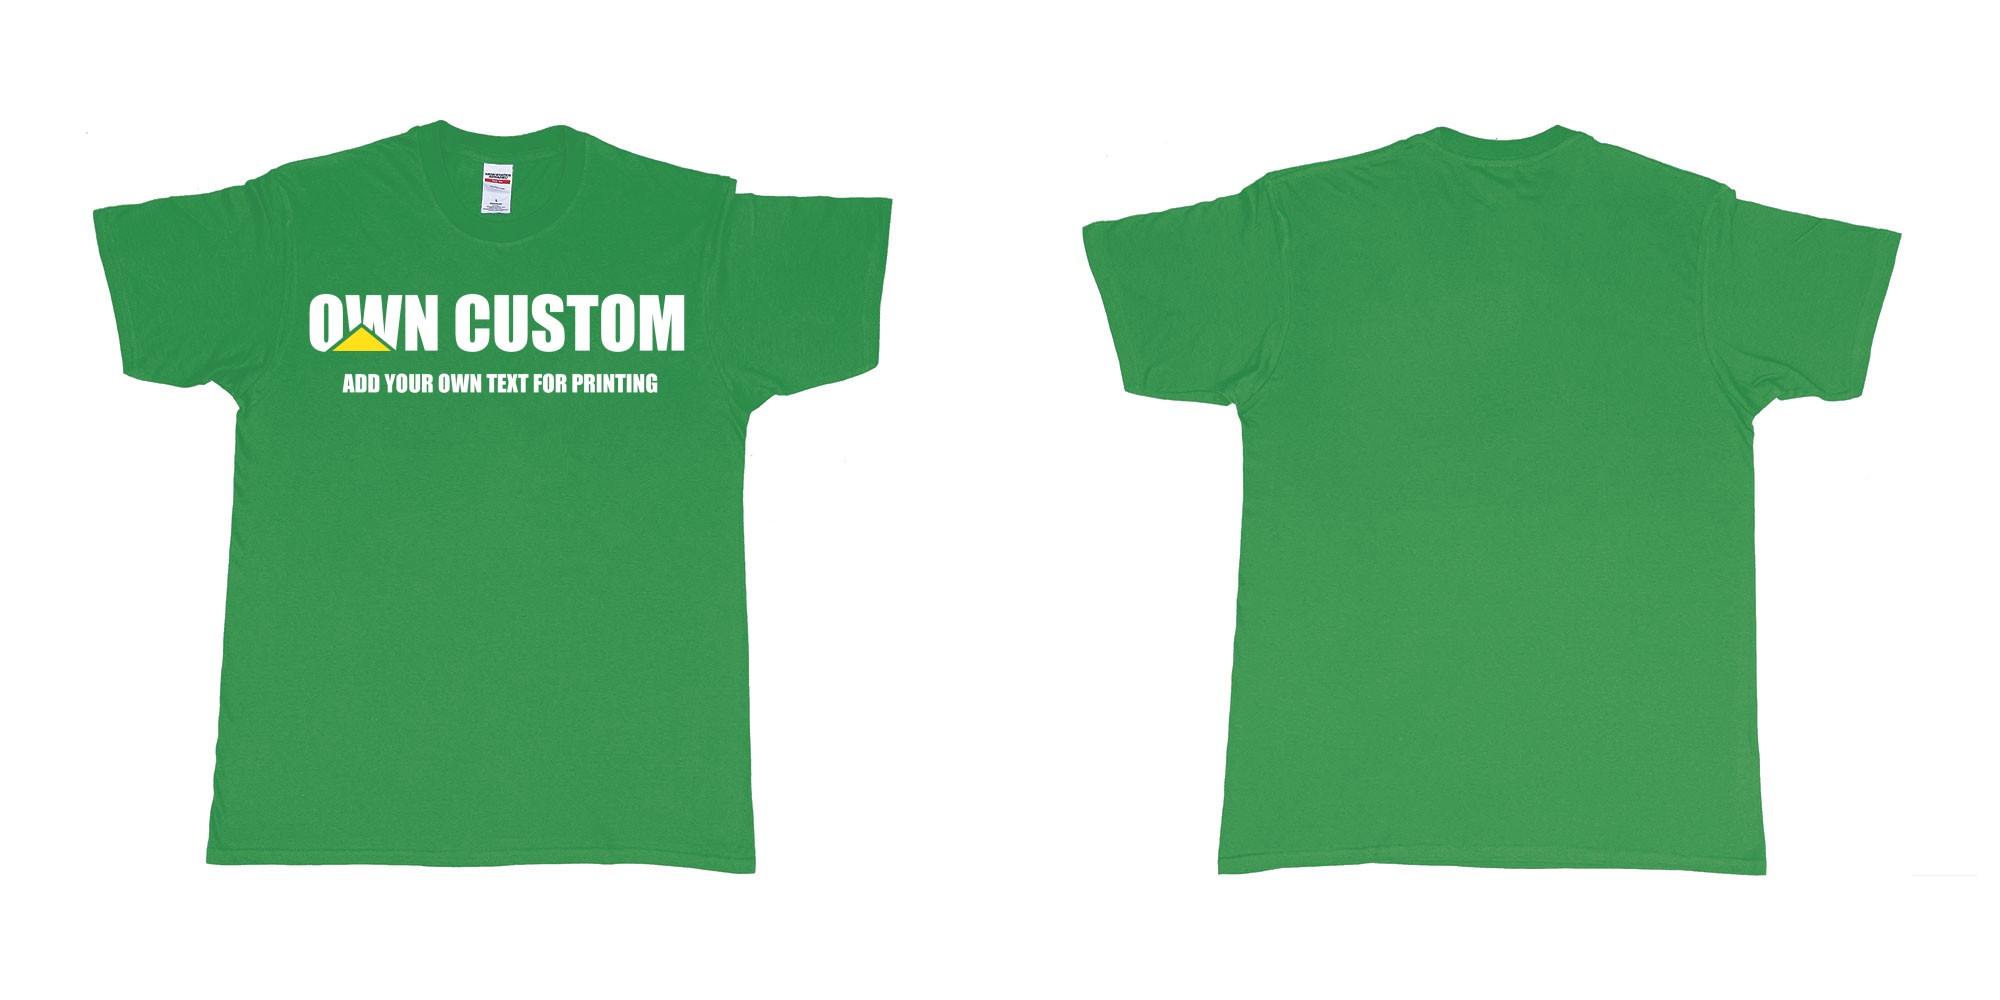 Custom tshirt design caterpillar inc logo custom text printing shirt in fabric color irish-green choice your own text made in Bali by The Pirate Way